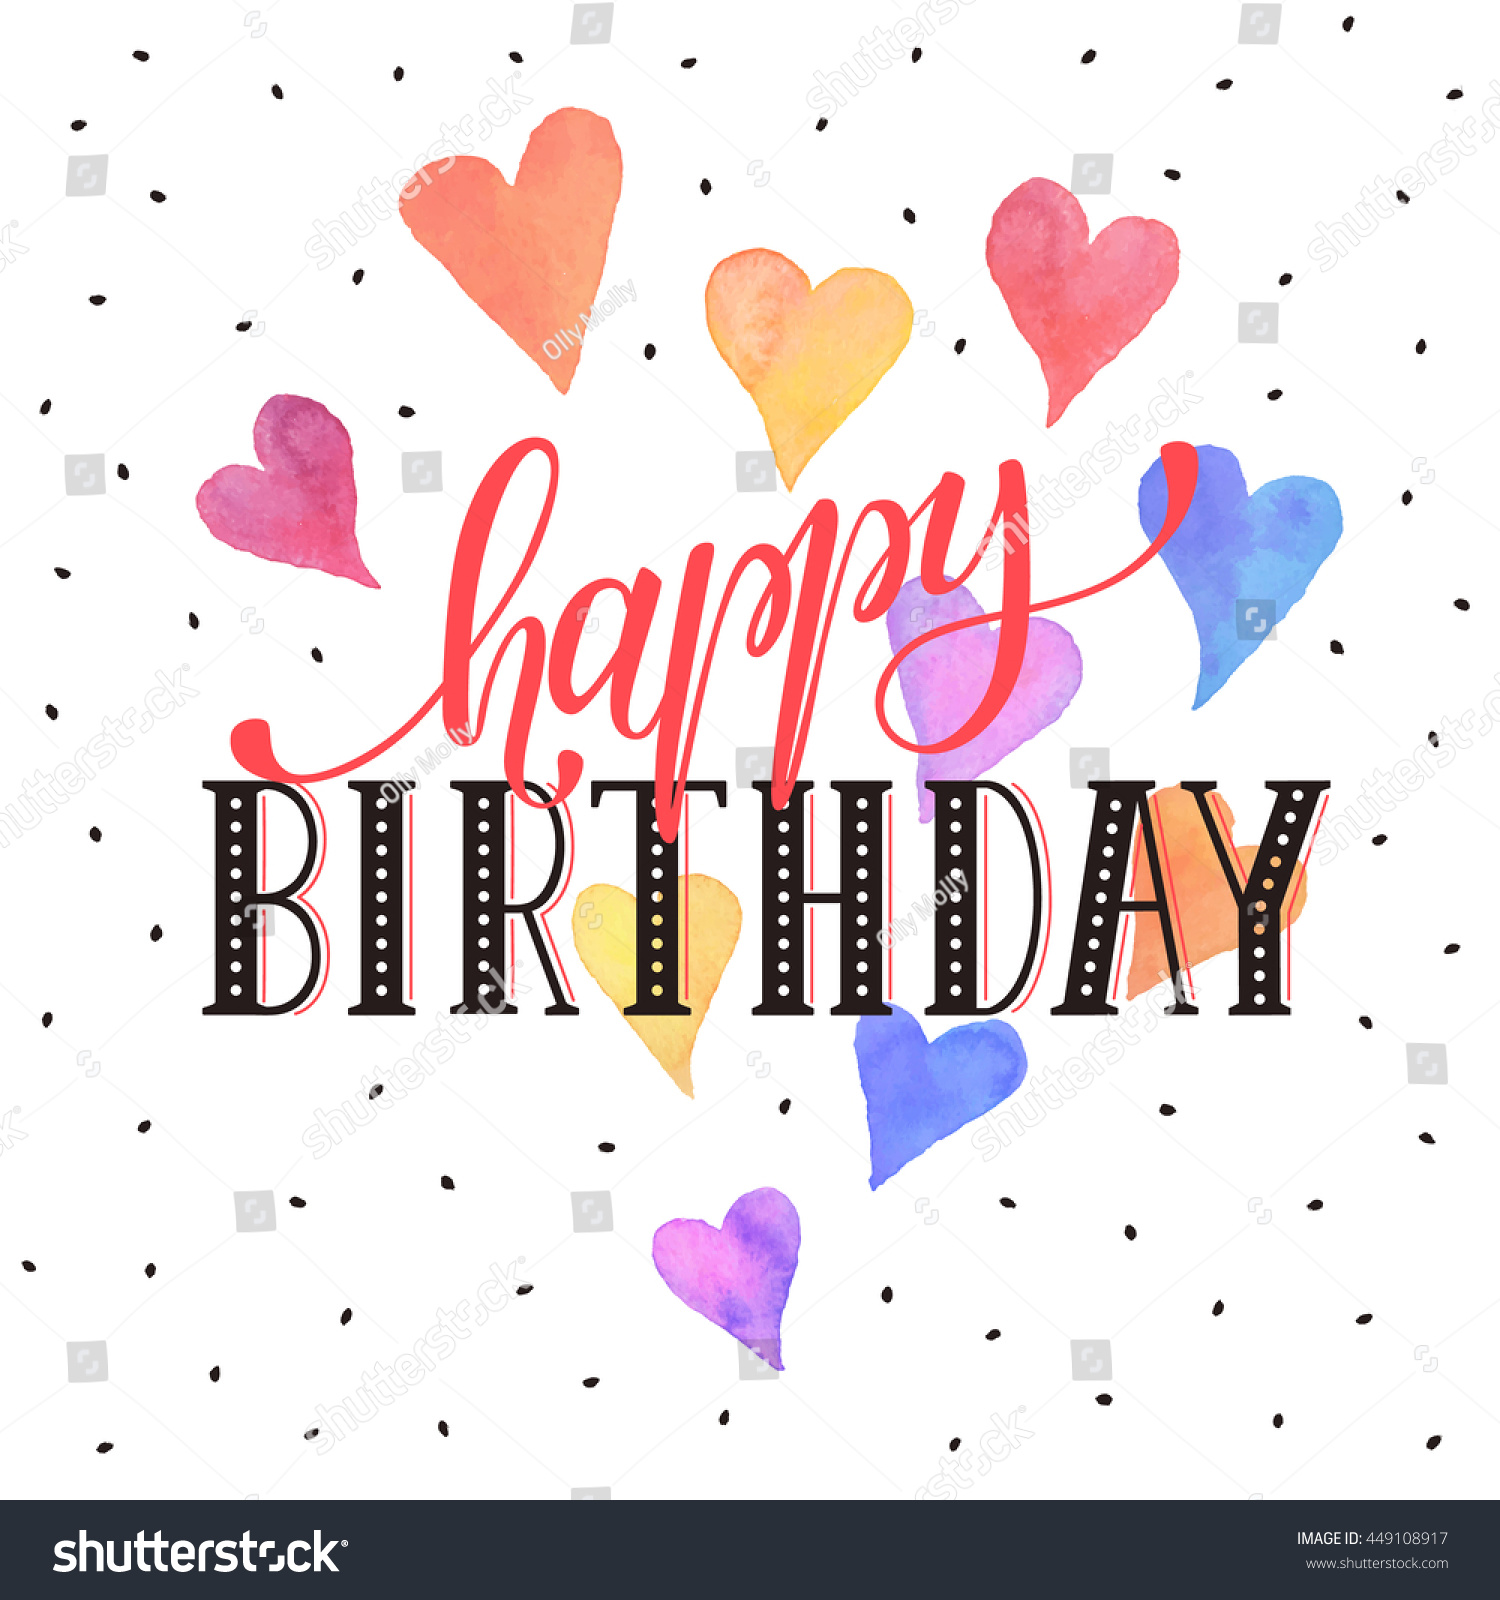 Happy Birthday Greeting Card Colorful Watercolor Stock Vector 449108917 ...